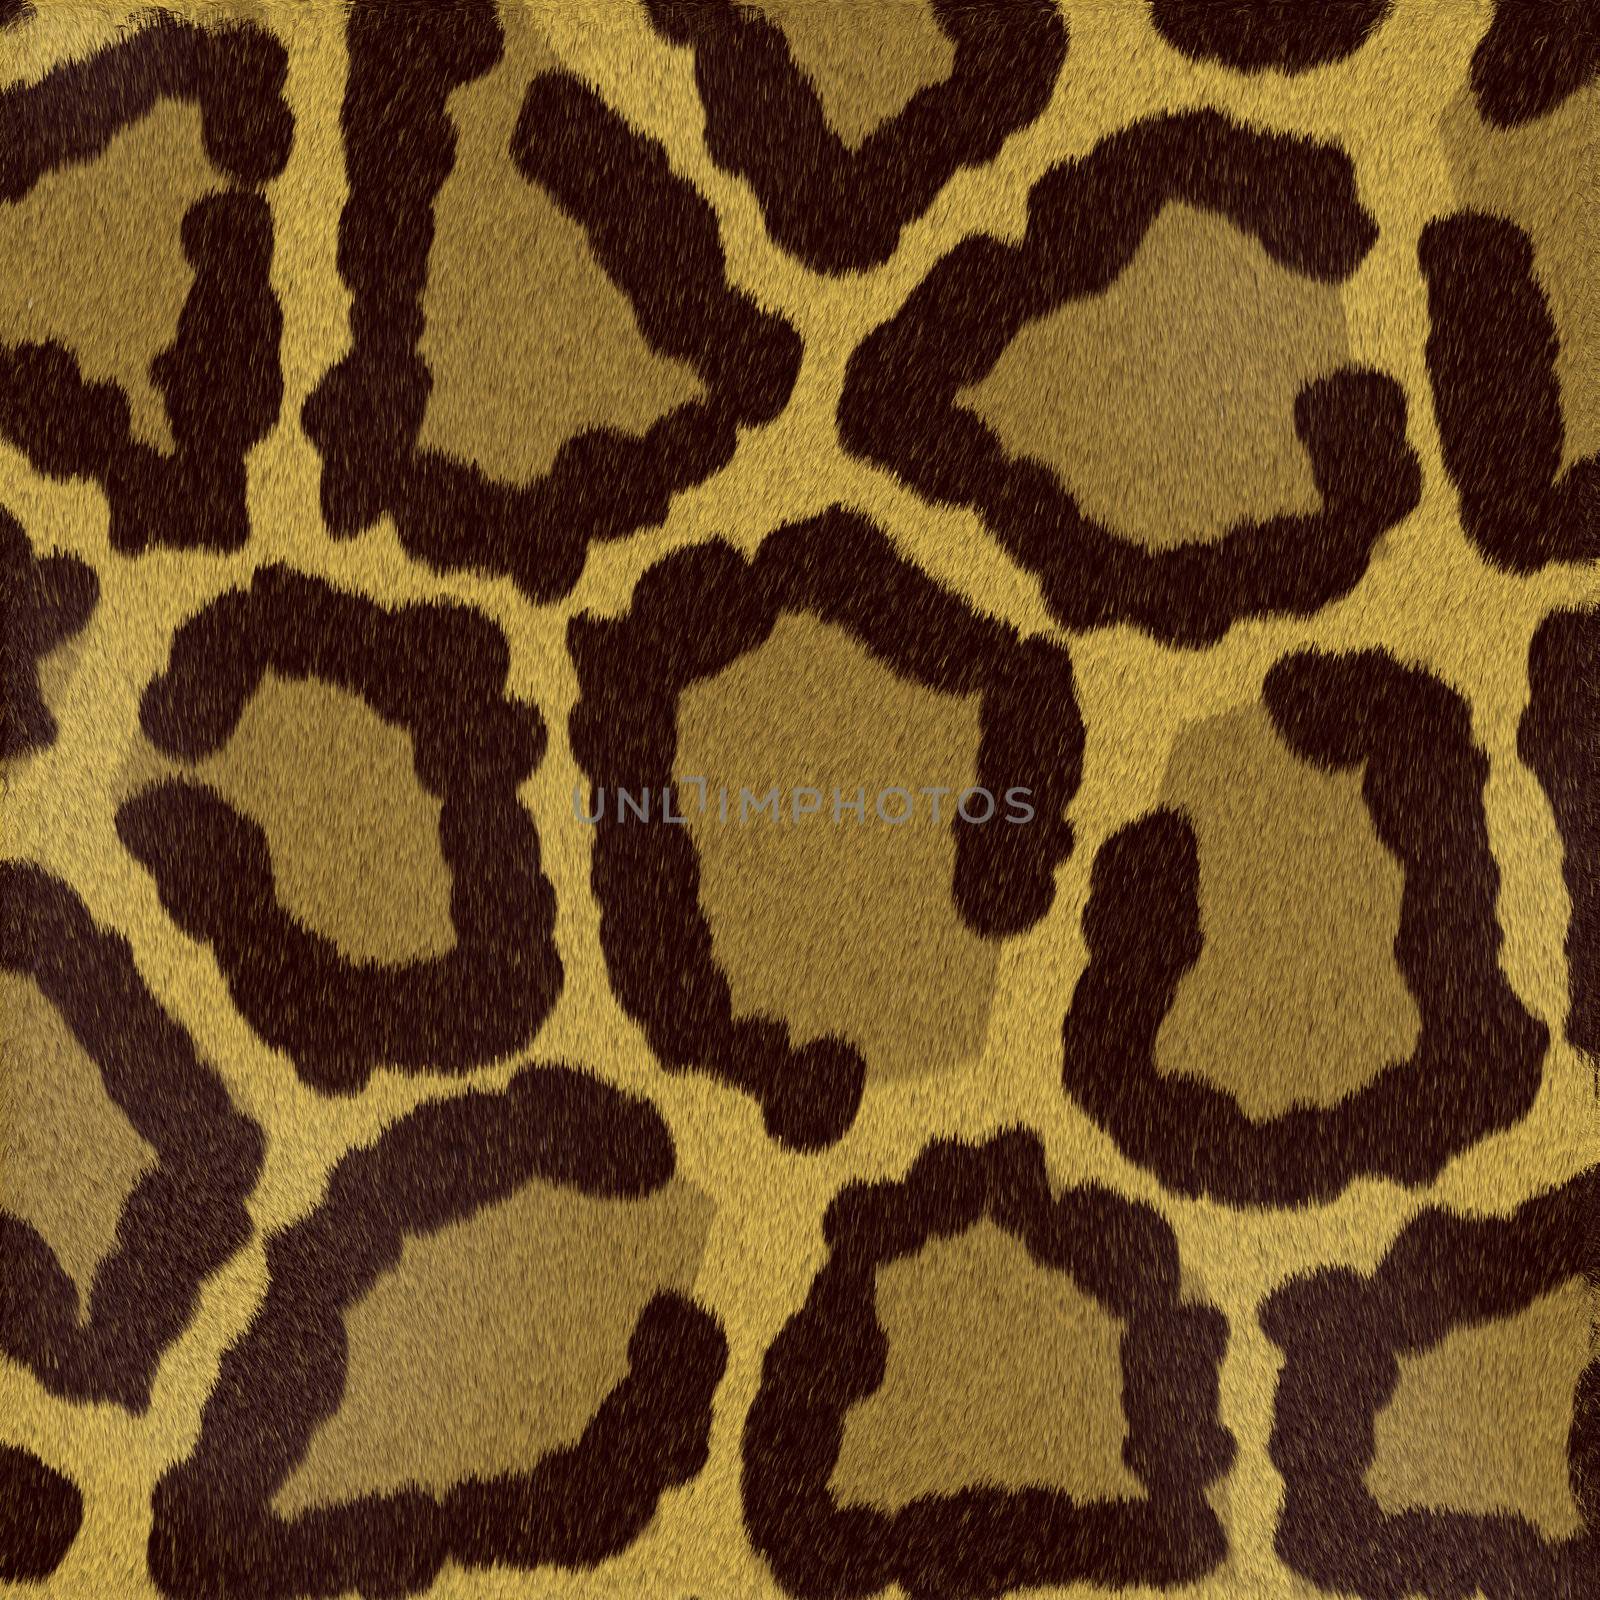 Structure of an animal (short-haired wool) - leopard